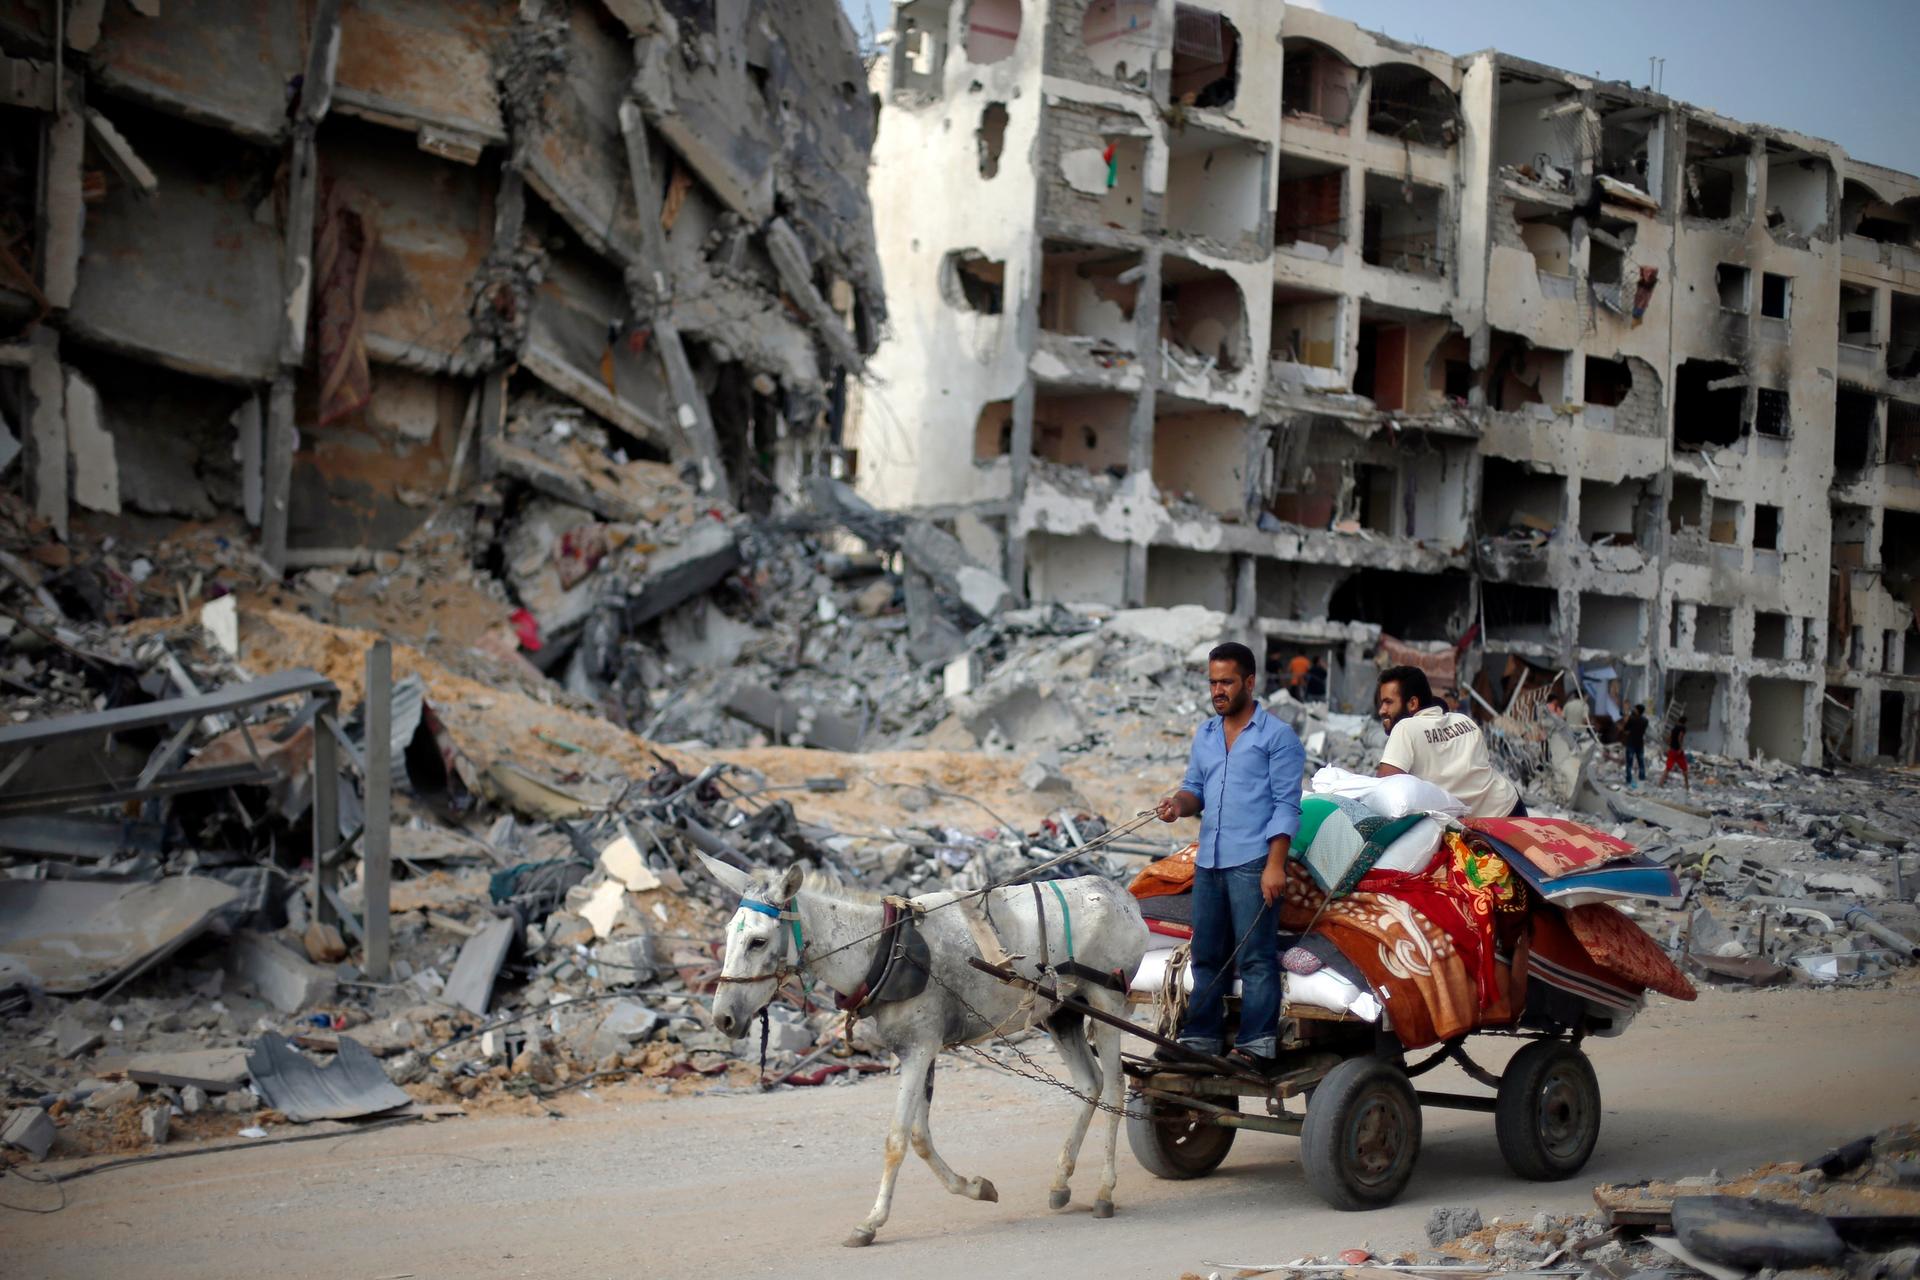 Palestinians ride a donkey cart past destroyed and badly damaged residential buildings as they return to Beit Lahiya town, which witnesses said was heavily hit by Israeli shelling and air strikes during the Israeli offensive.